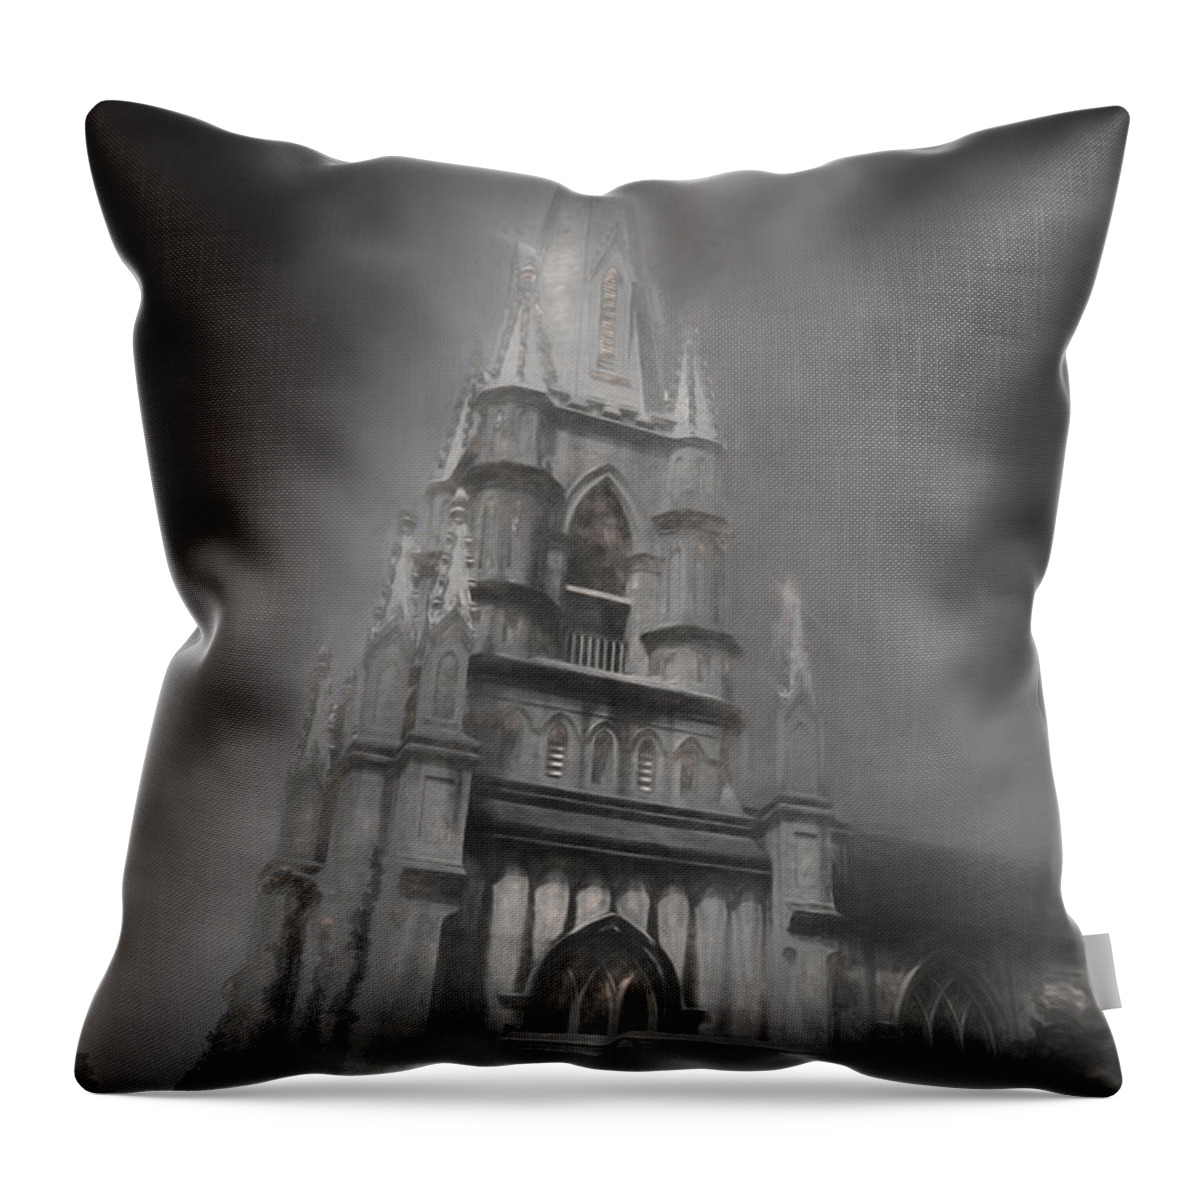 Castle Throw Pillow featuring the photograph Grace Episcopal Church by James Hill